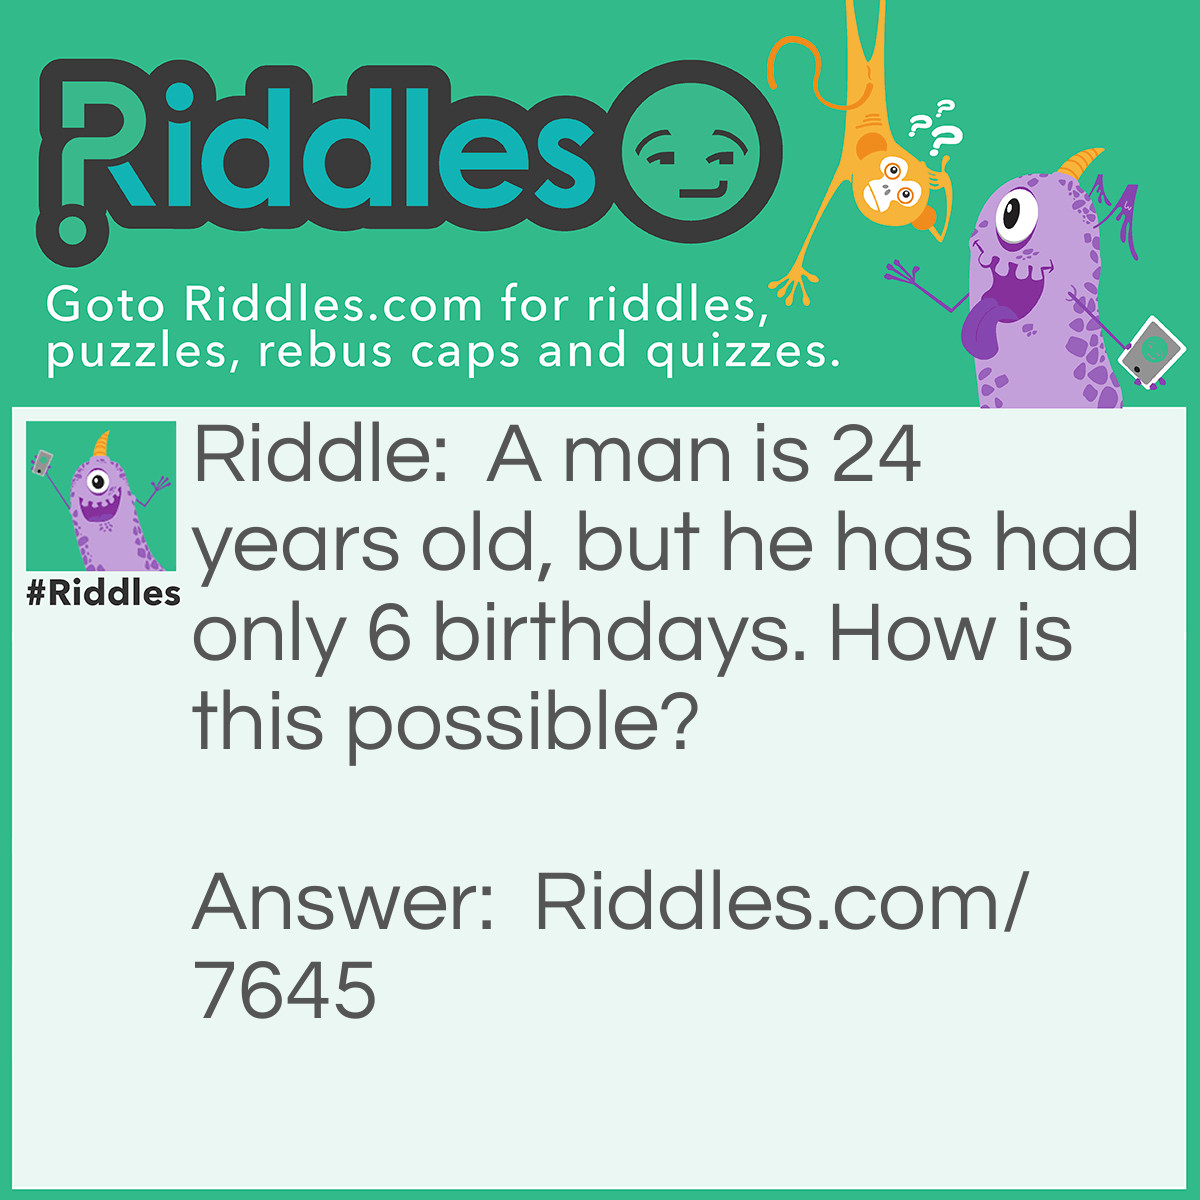 Riddle: A man is 24 years old, but he has had only 6 birthdays. How is this possible? Answer: He was born on February 29th.